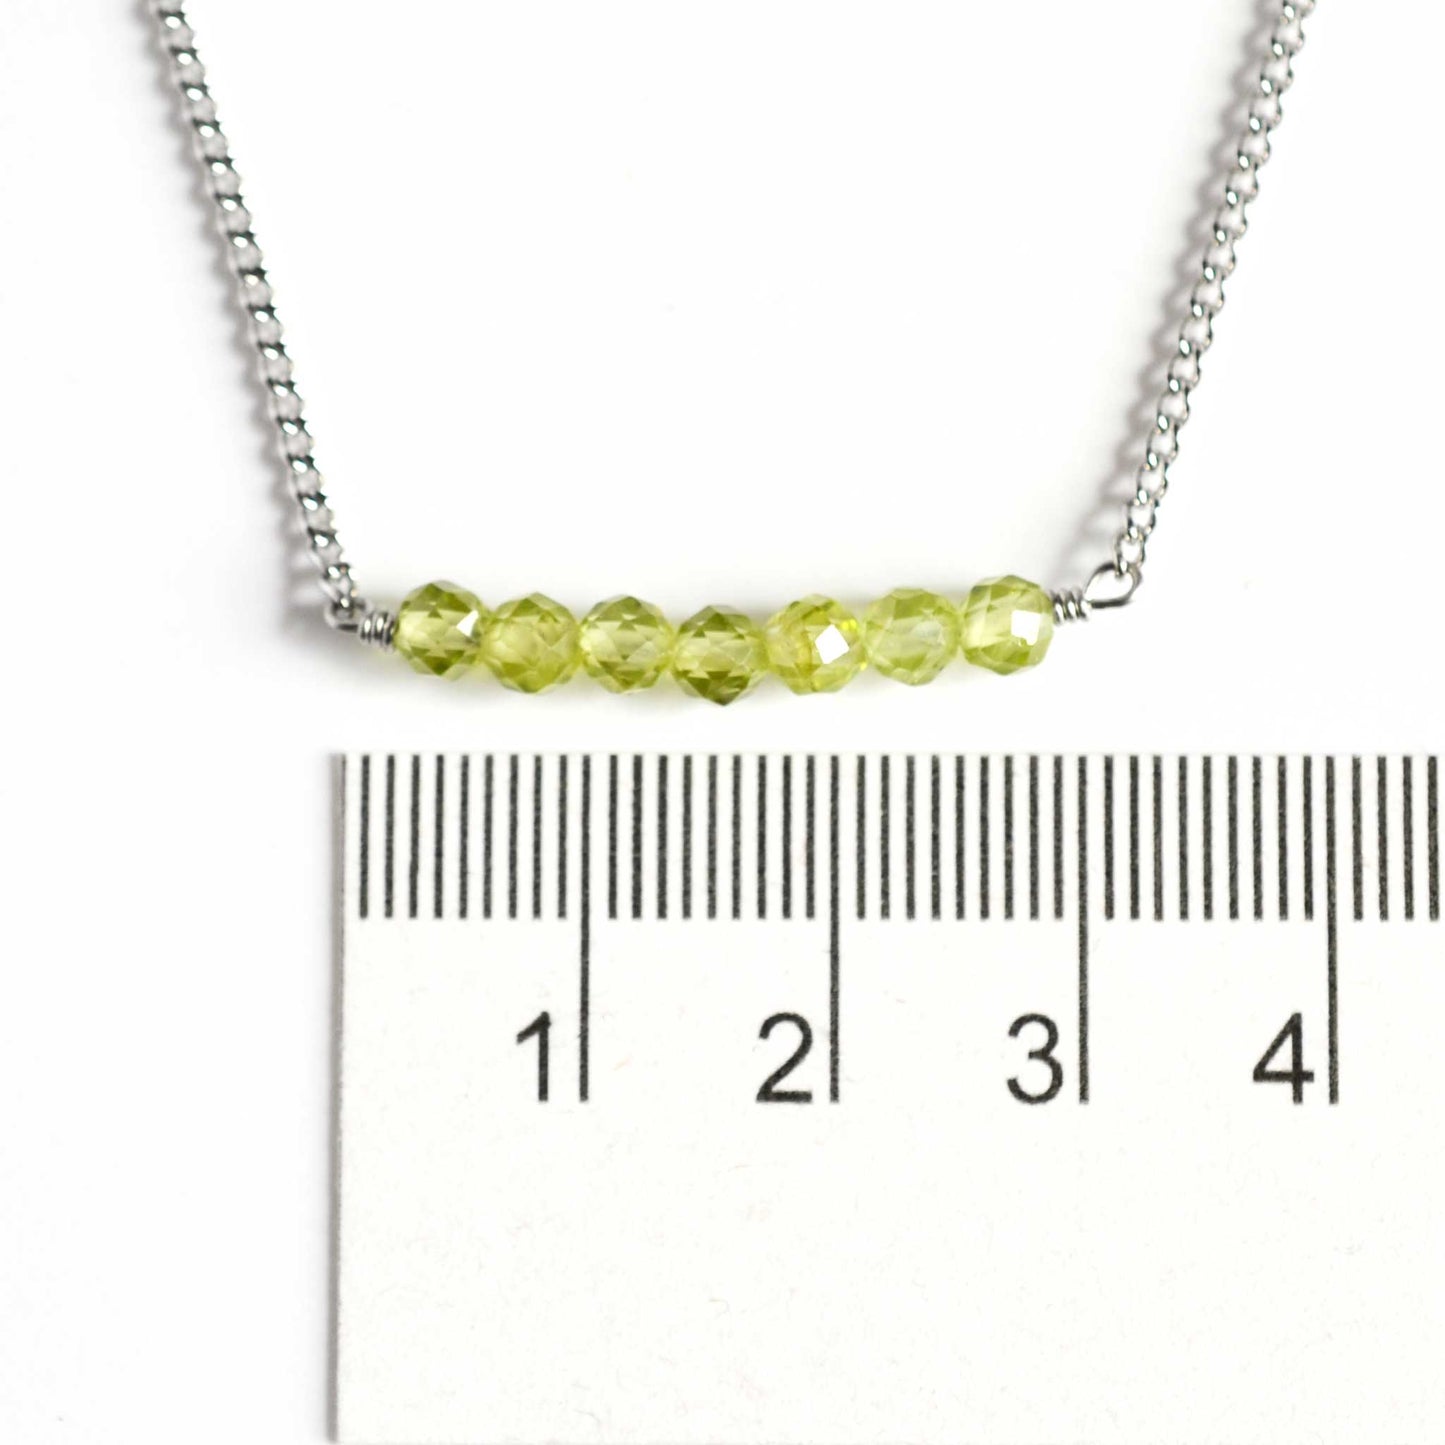 Dainty Peridot bar necklace with 4mm gemstone beads next to ruler